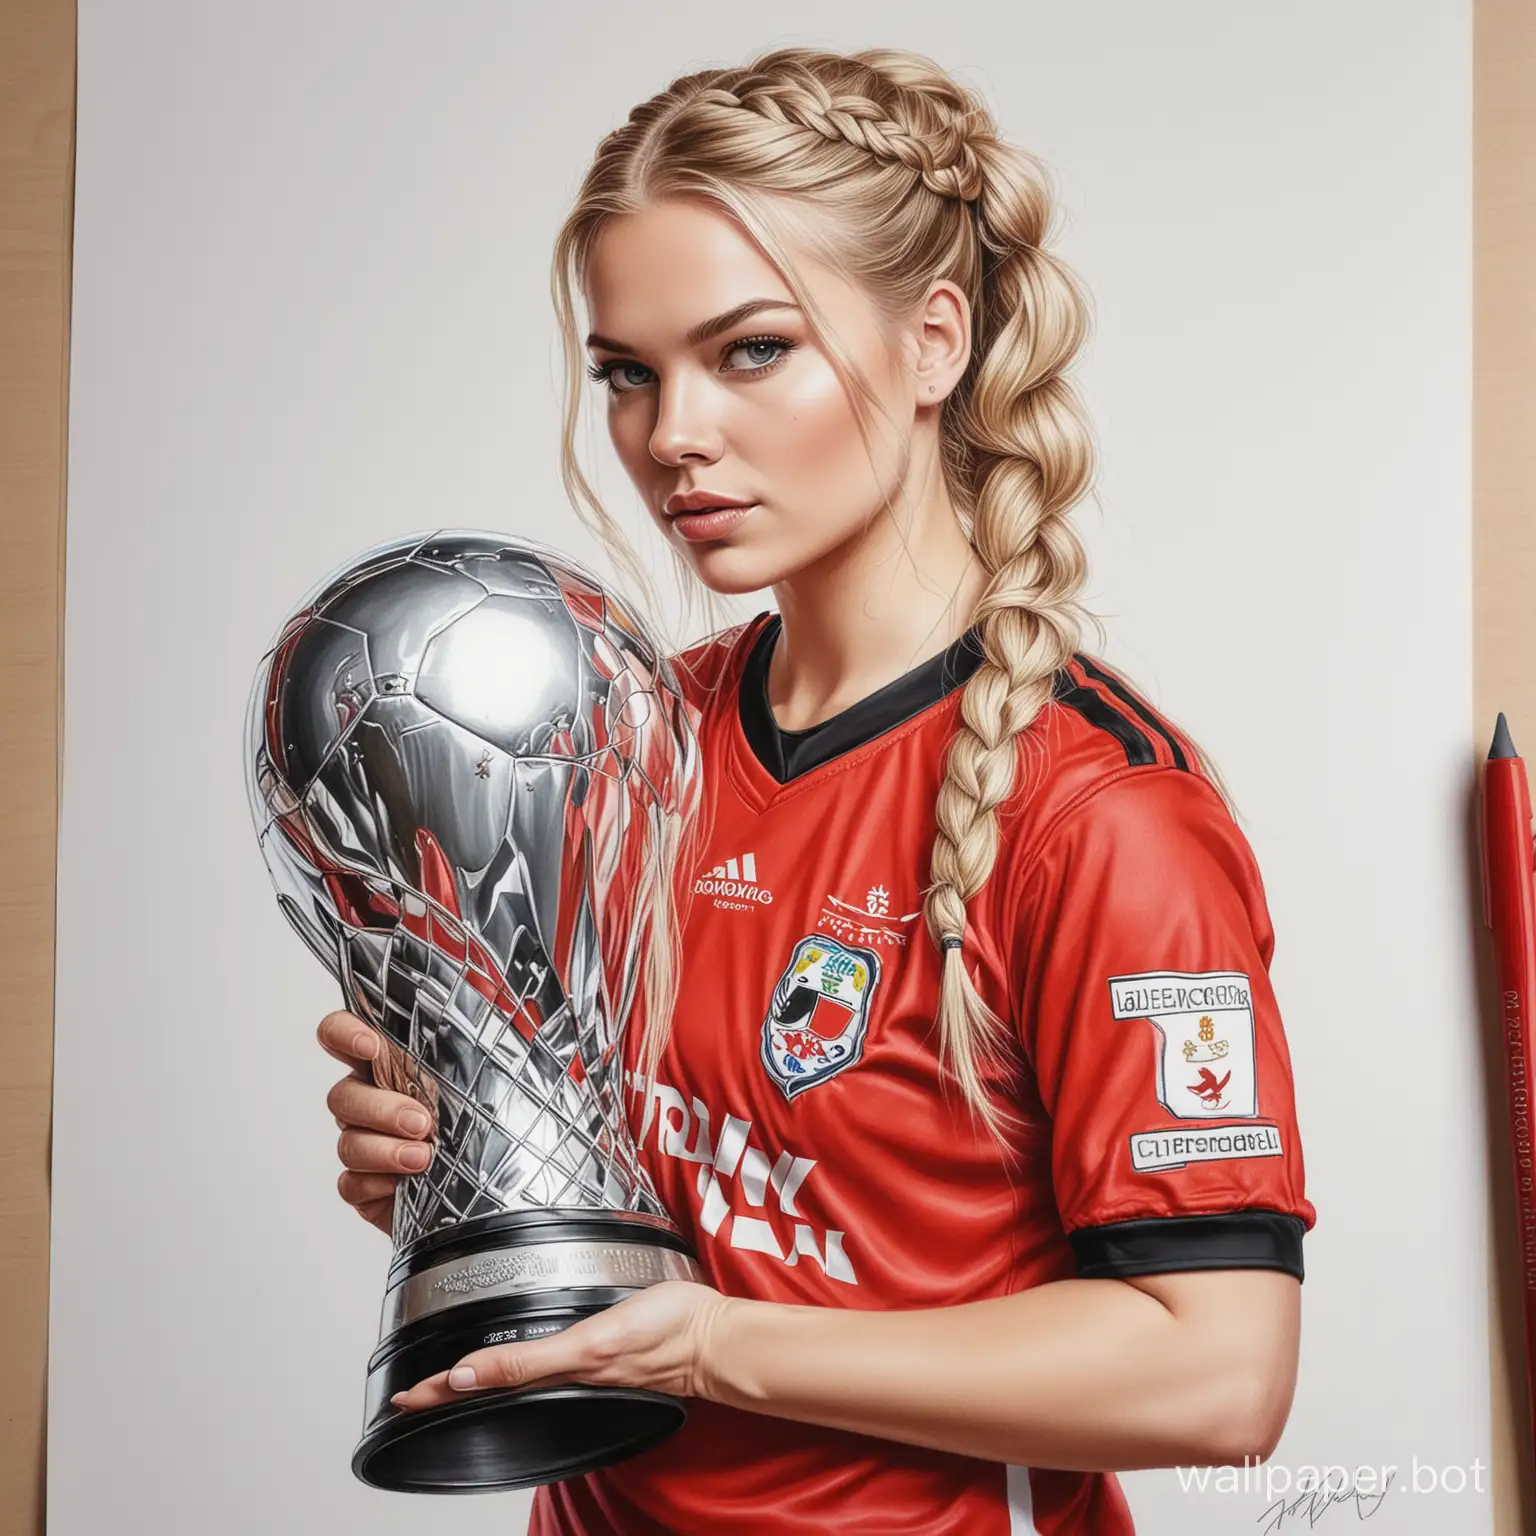 sketch young Marta Ilonen 26 years old light hair with a braid 4 size bust narrow waist in red and black football uniform holding a large Champions Cup white background high realism drawing with colored marker